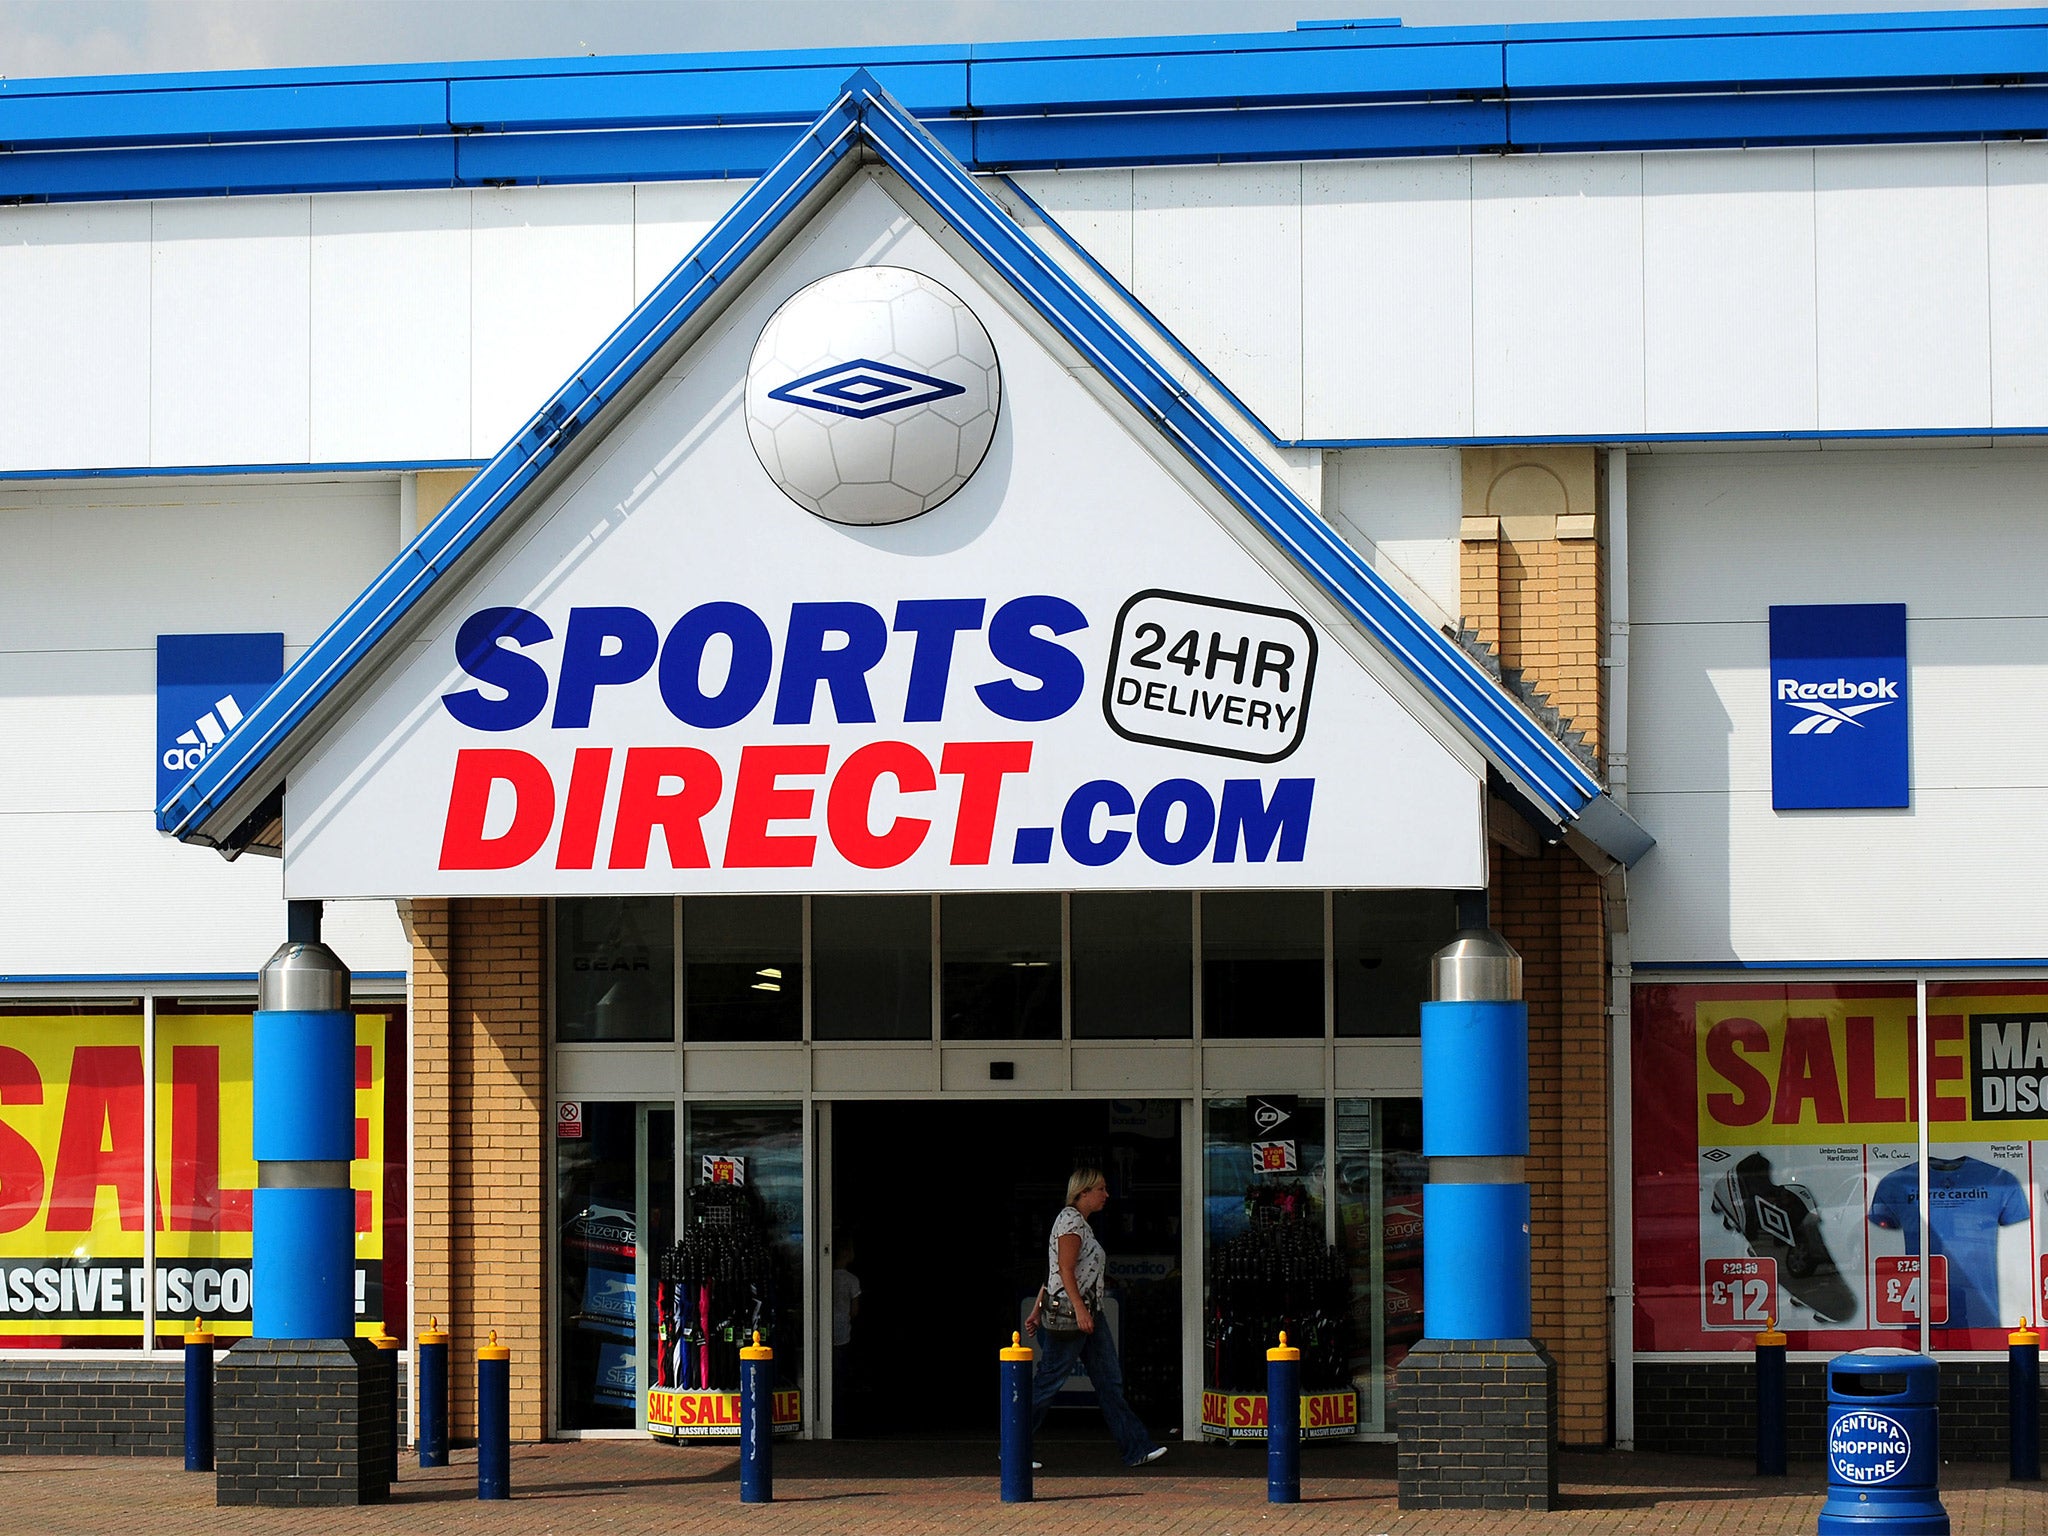 Sports Direct shares have been wobbling like one of the cheap basketballs it sells hitting the rim of a net.